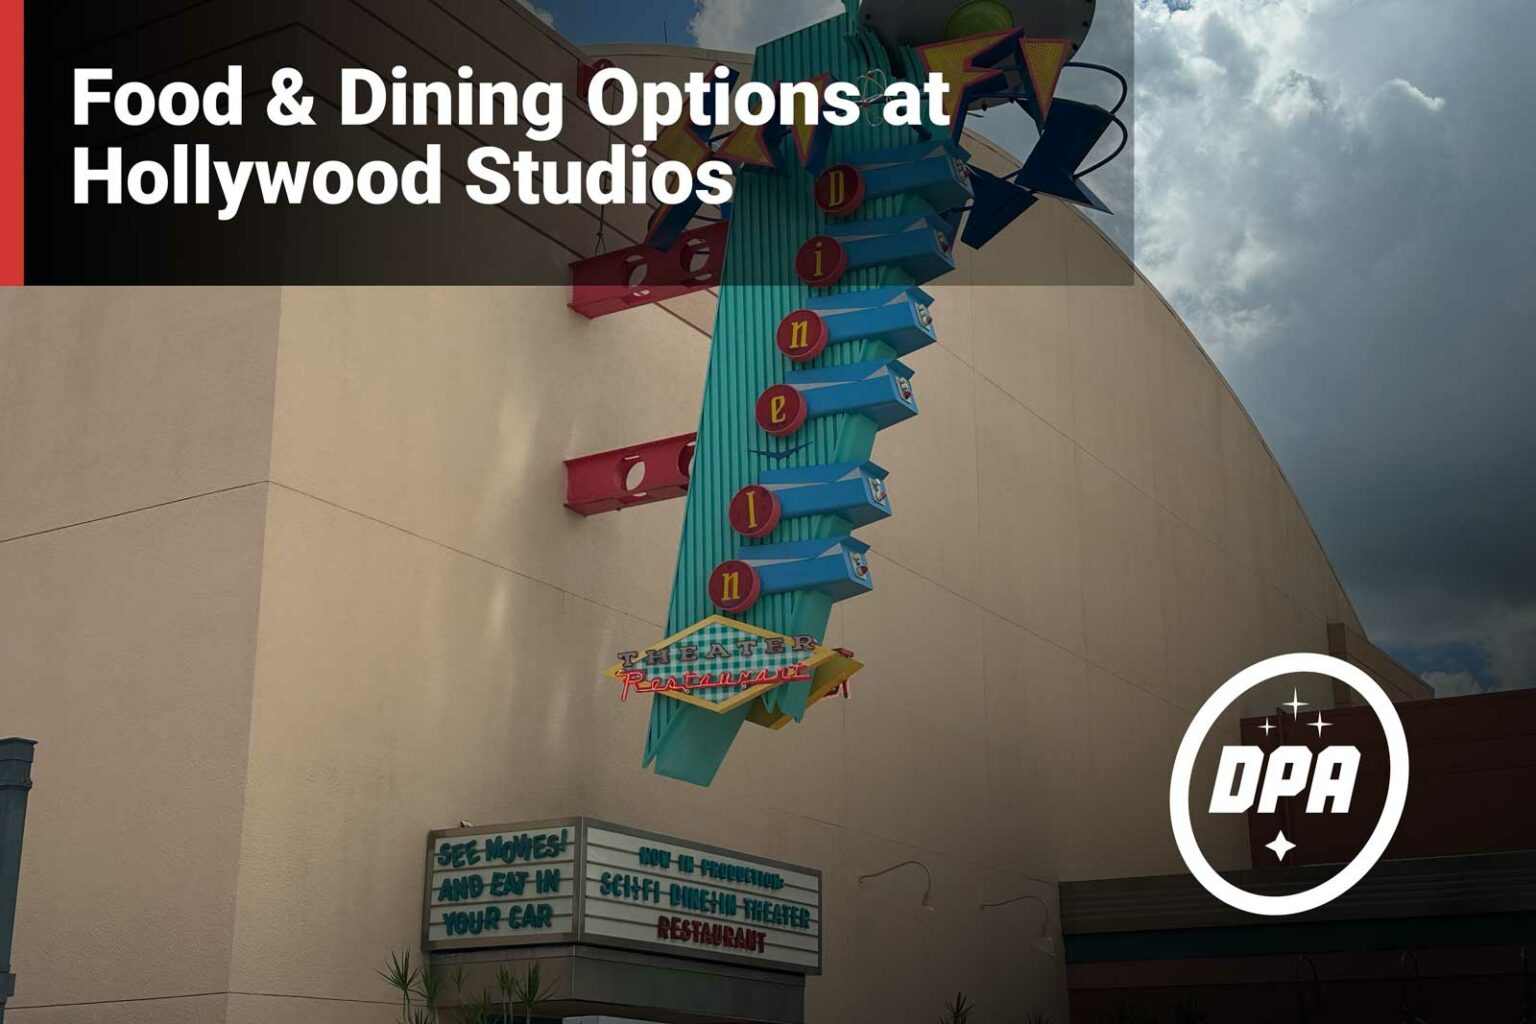 The Sci-Fi Dine-In Theatre is just one of the great Food & Dining Options at Disney's Hollywood Studios